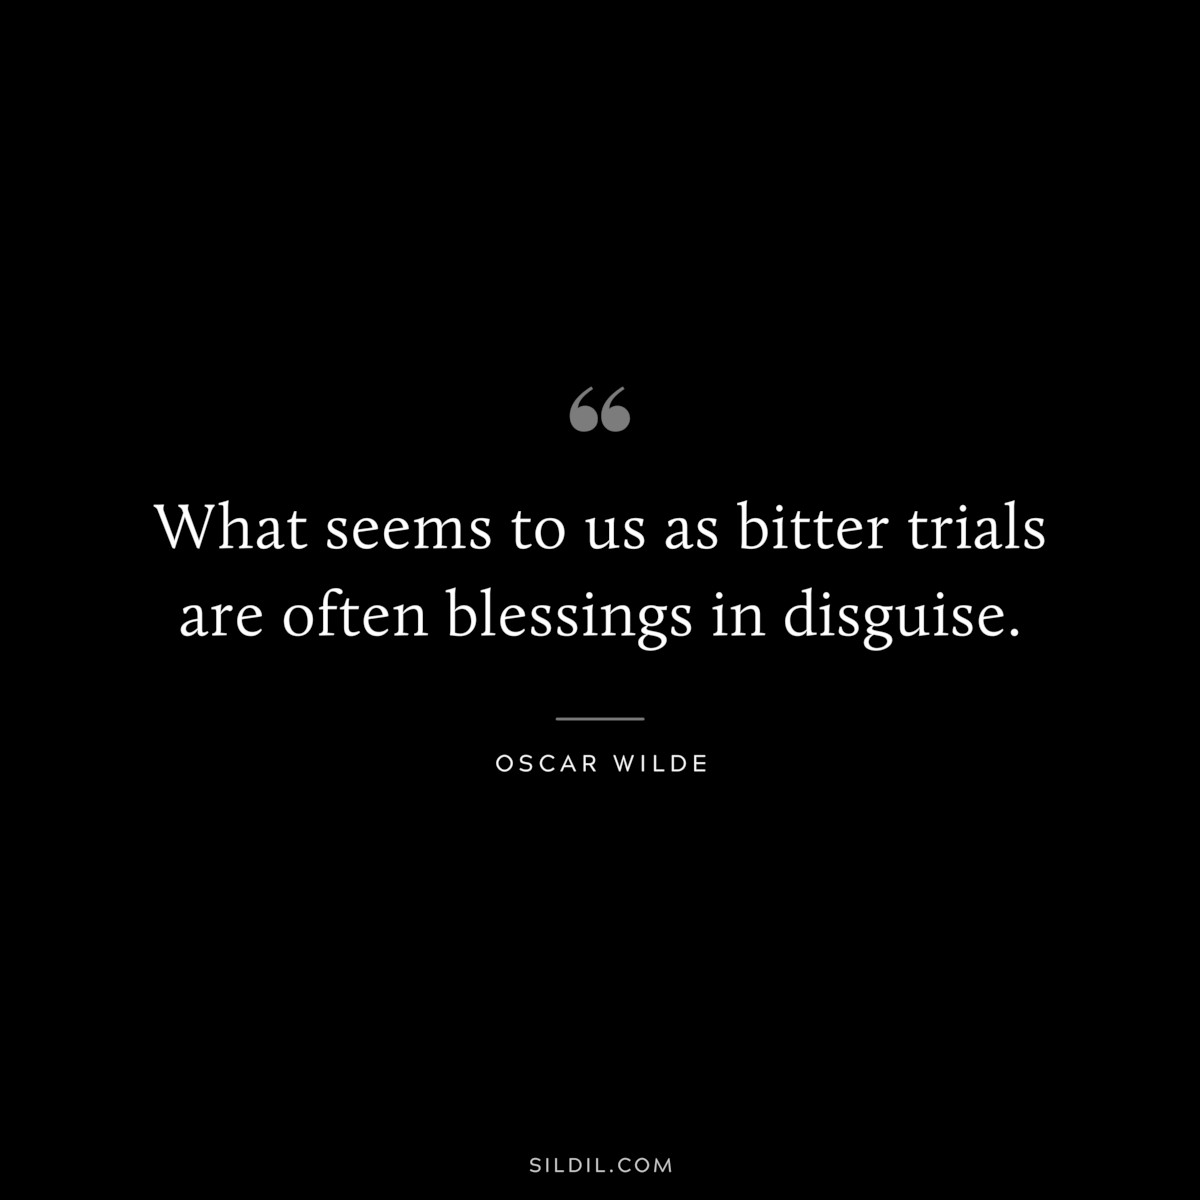 What seems to us as bitter trials are often blessings in disguise. ― Oscar Wilde